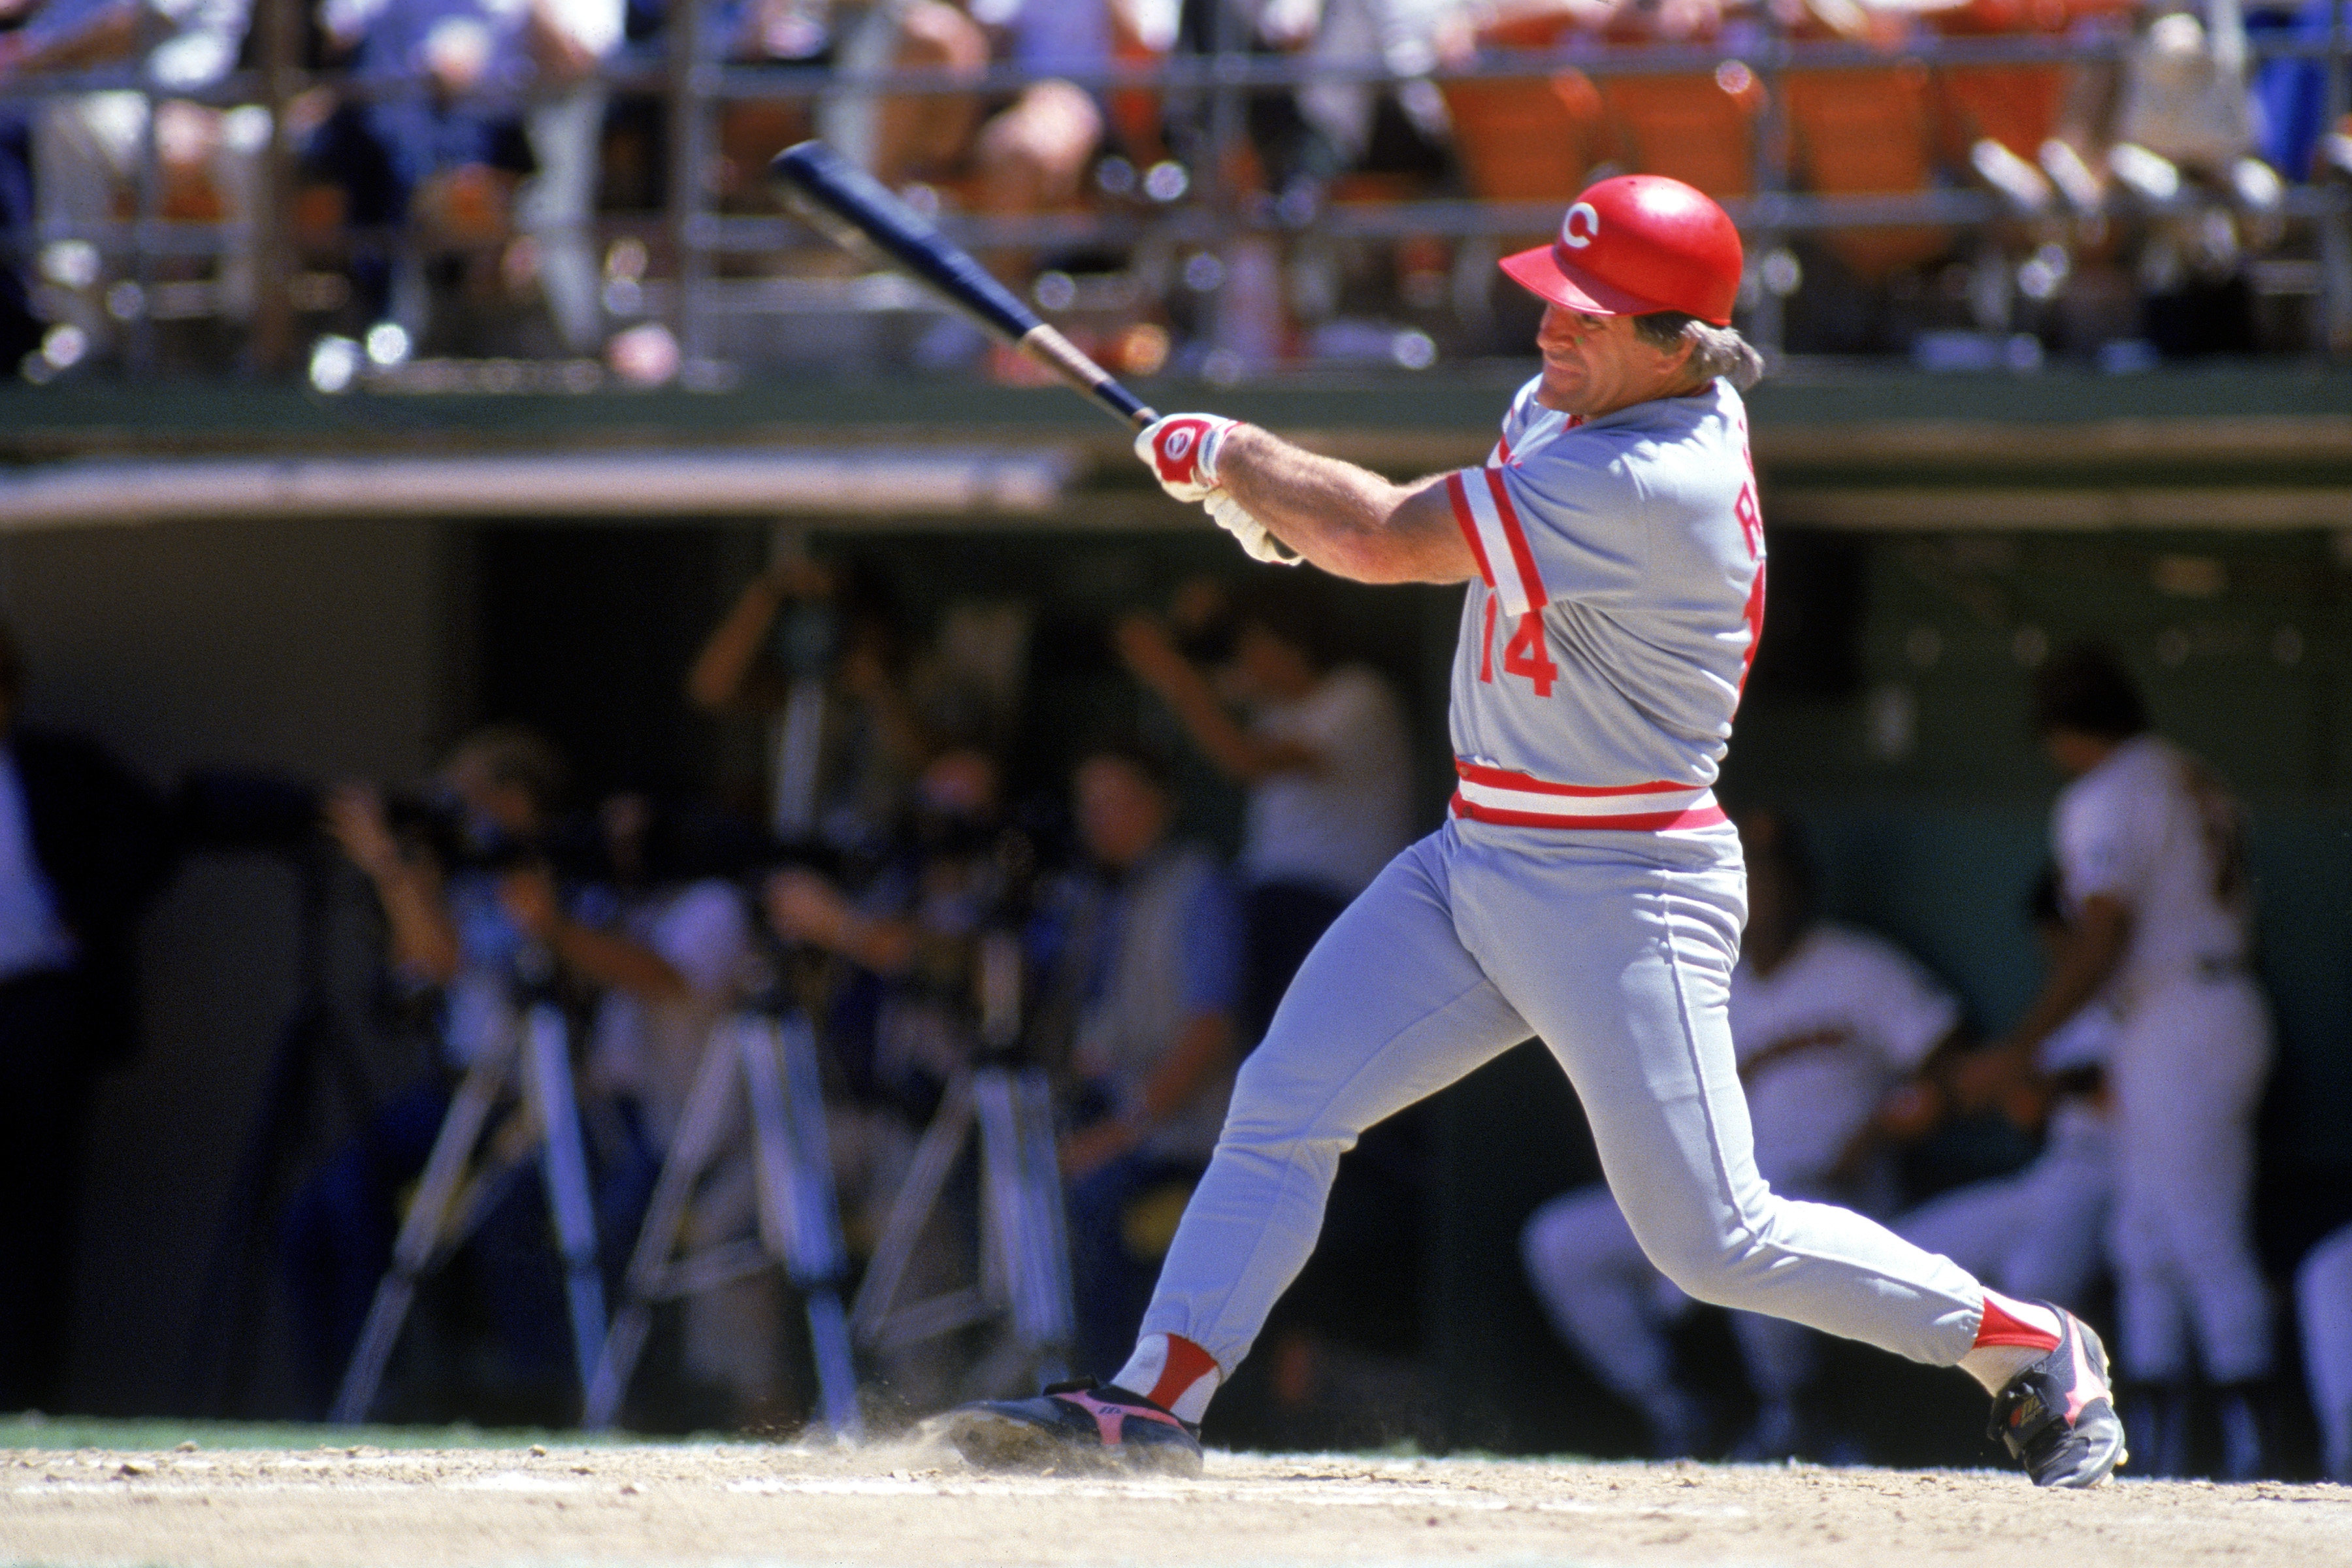 SAN DIEGO, CA - 1986:  Pete Rose #14 of the Cincinnati Reds swings at a pitch during a game against the San Diego Padres at Jack Murphy Stadium in the 1986 MLB season in San Diego, California.  (Photo by Stephen Dunn/Getty Images)